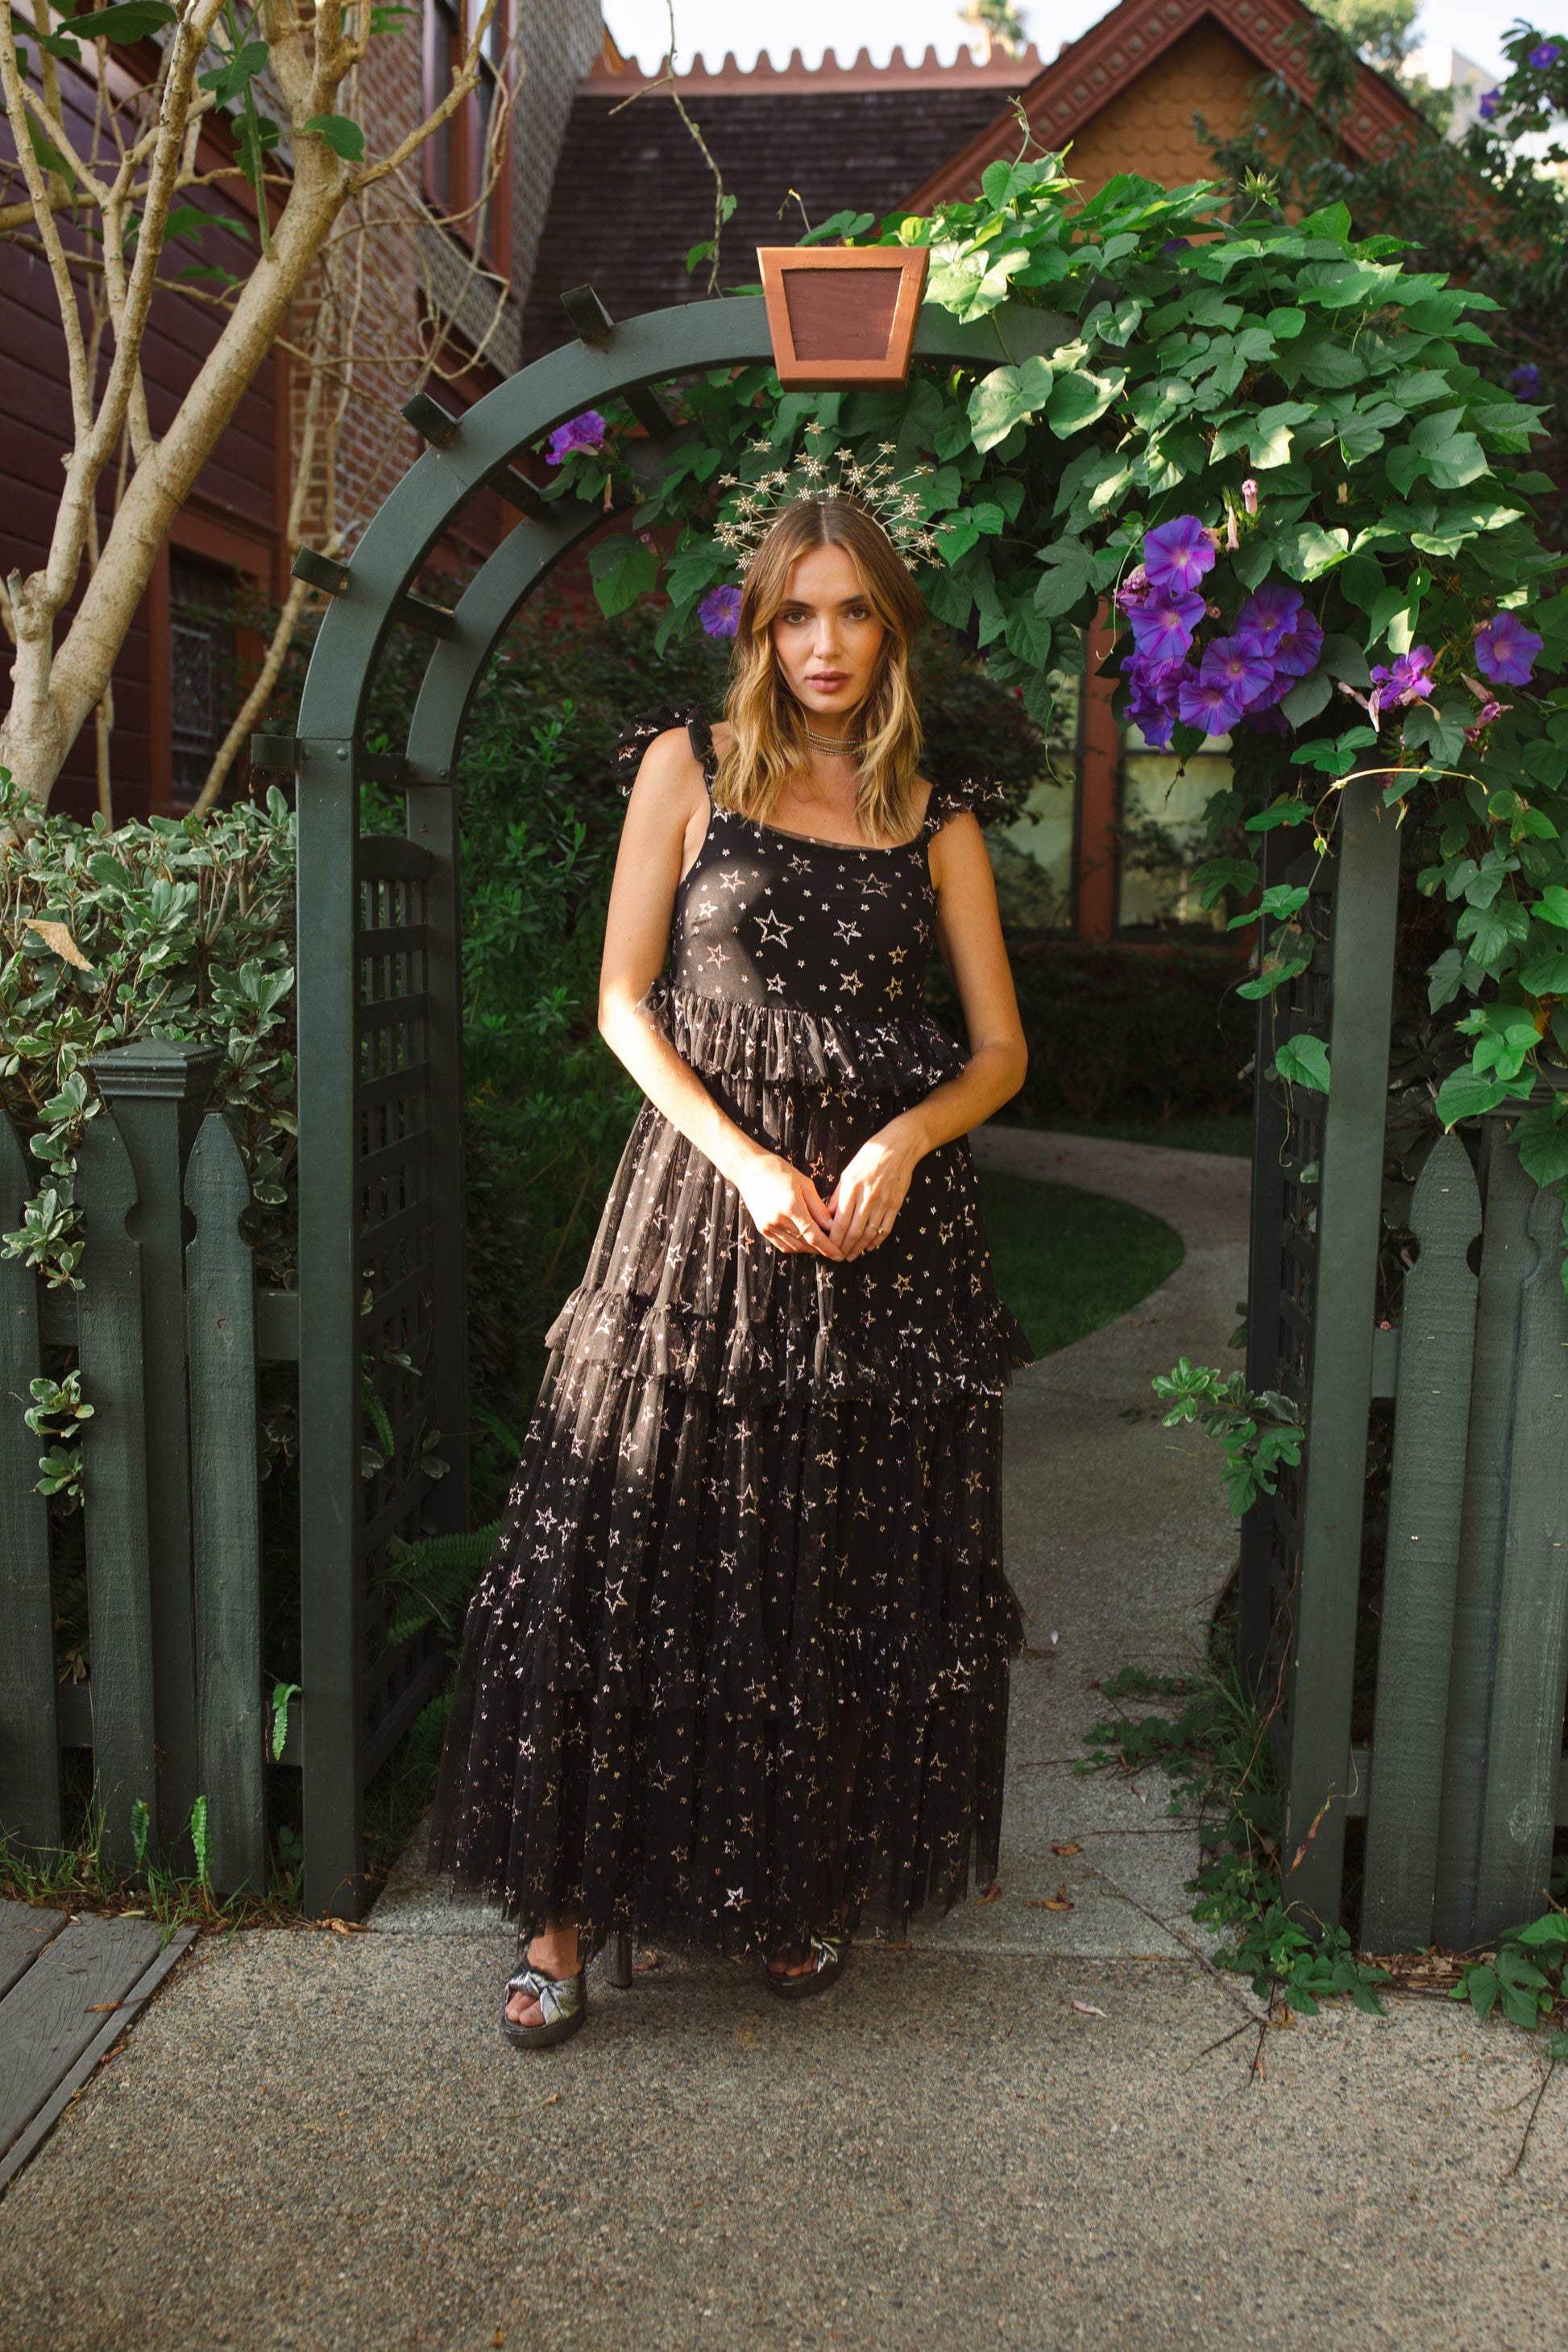 jennafer grace Midnight Sky Tulle Maxi Dress black semi-sheer lined layered tulle maxi dress with metallic gold foil star print ruffle straps starry gothic boho bohemian hippie dark romantic whimsical evening gown cocktail party statement piece handmade in California USA